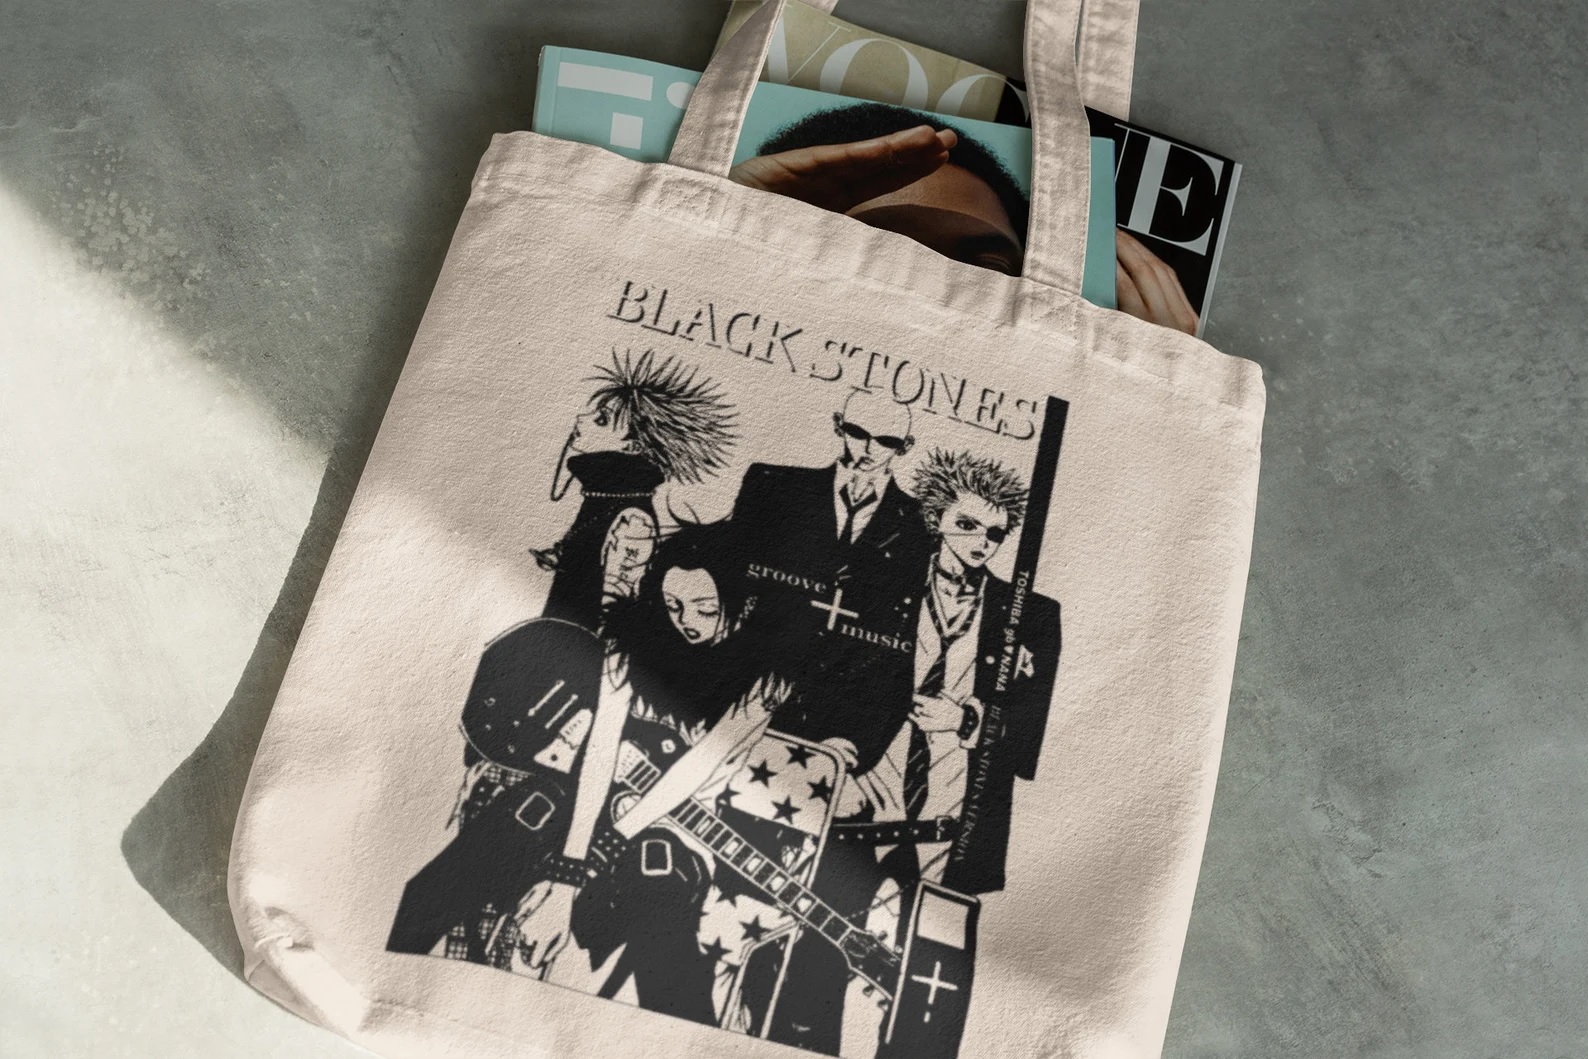 An off-white tote bag with a black-and-white image of the band Black Stones